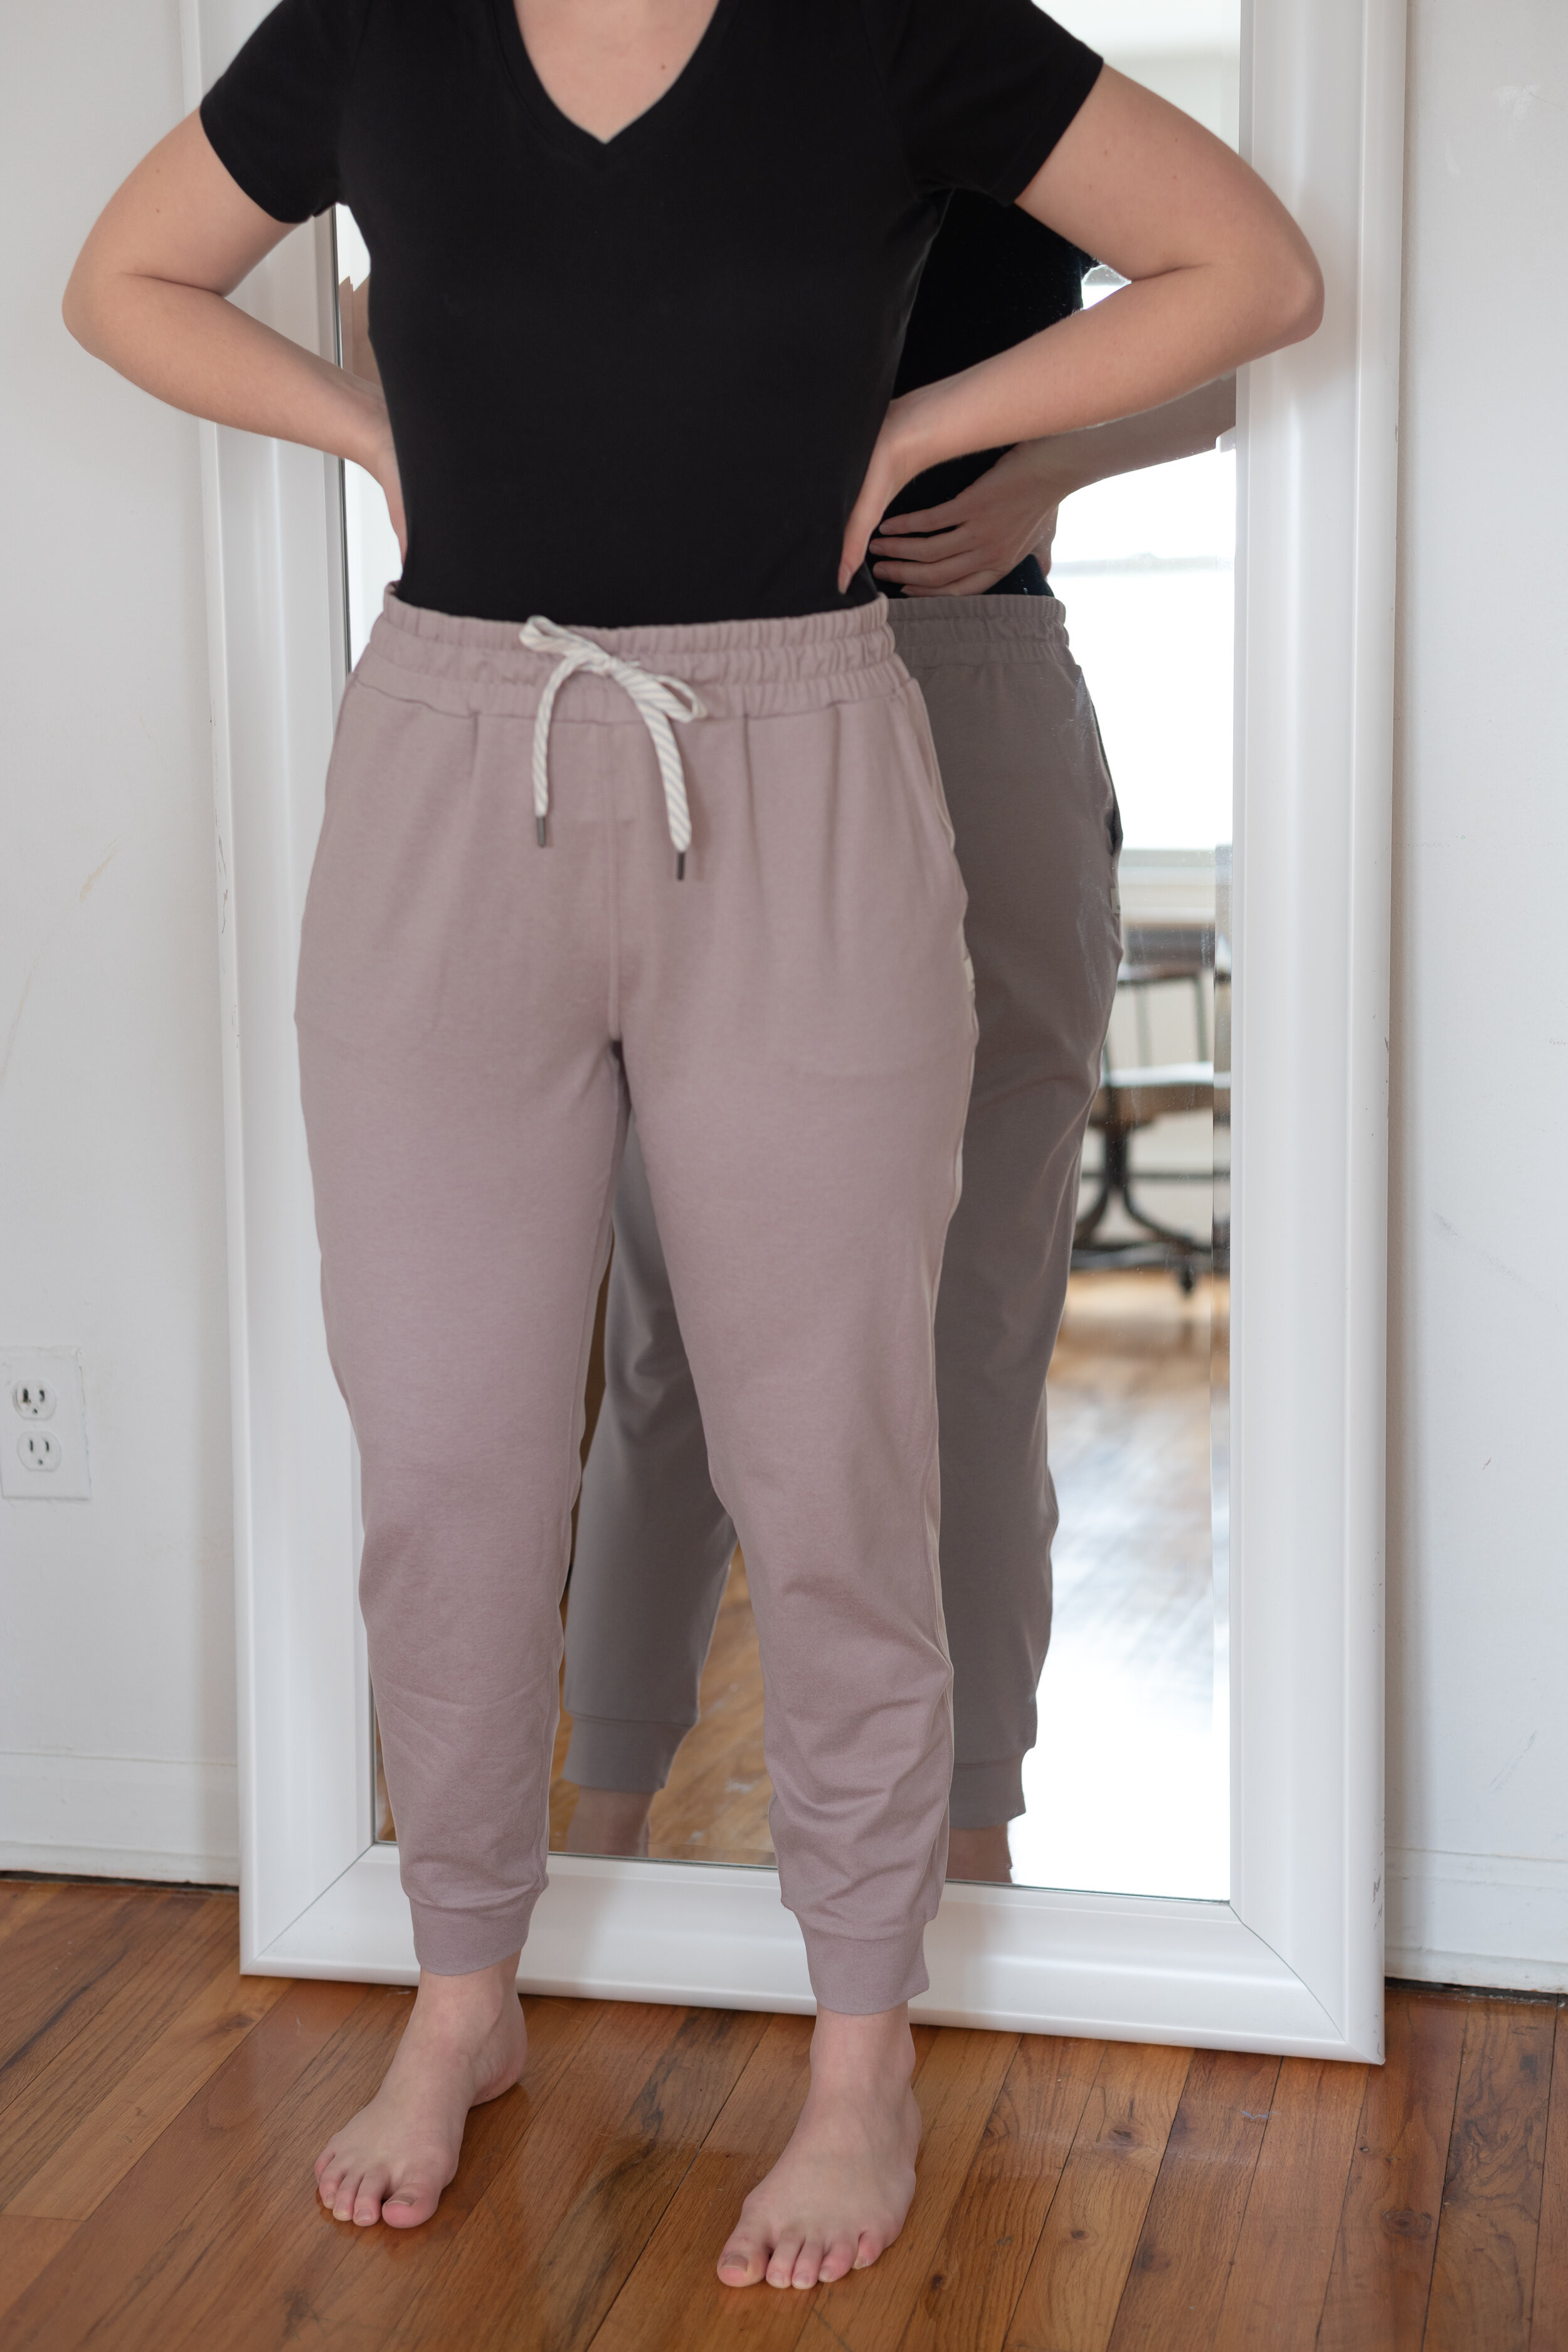 indbildskhed At regere tekst WHERE TO FIND PETITE-FRIENDLY LOUNGE PANTS & JOGGERS — The Petite Pear  Project